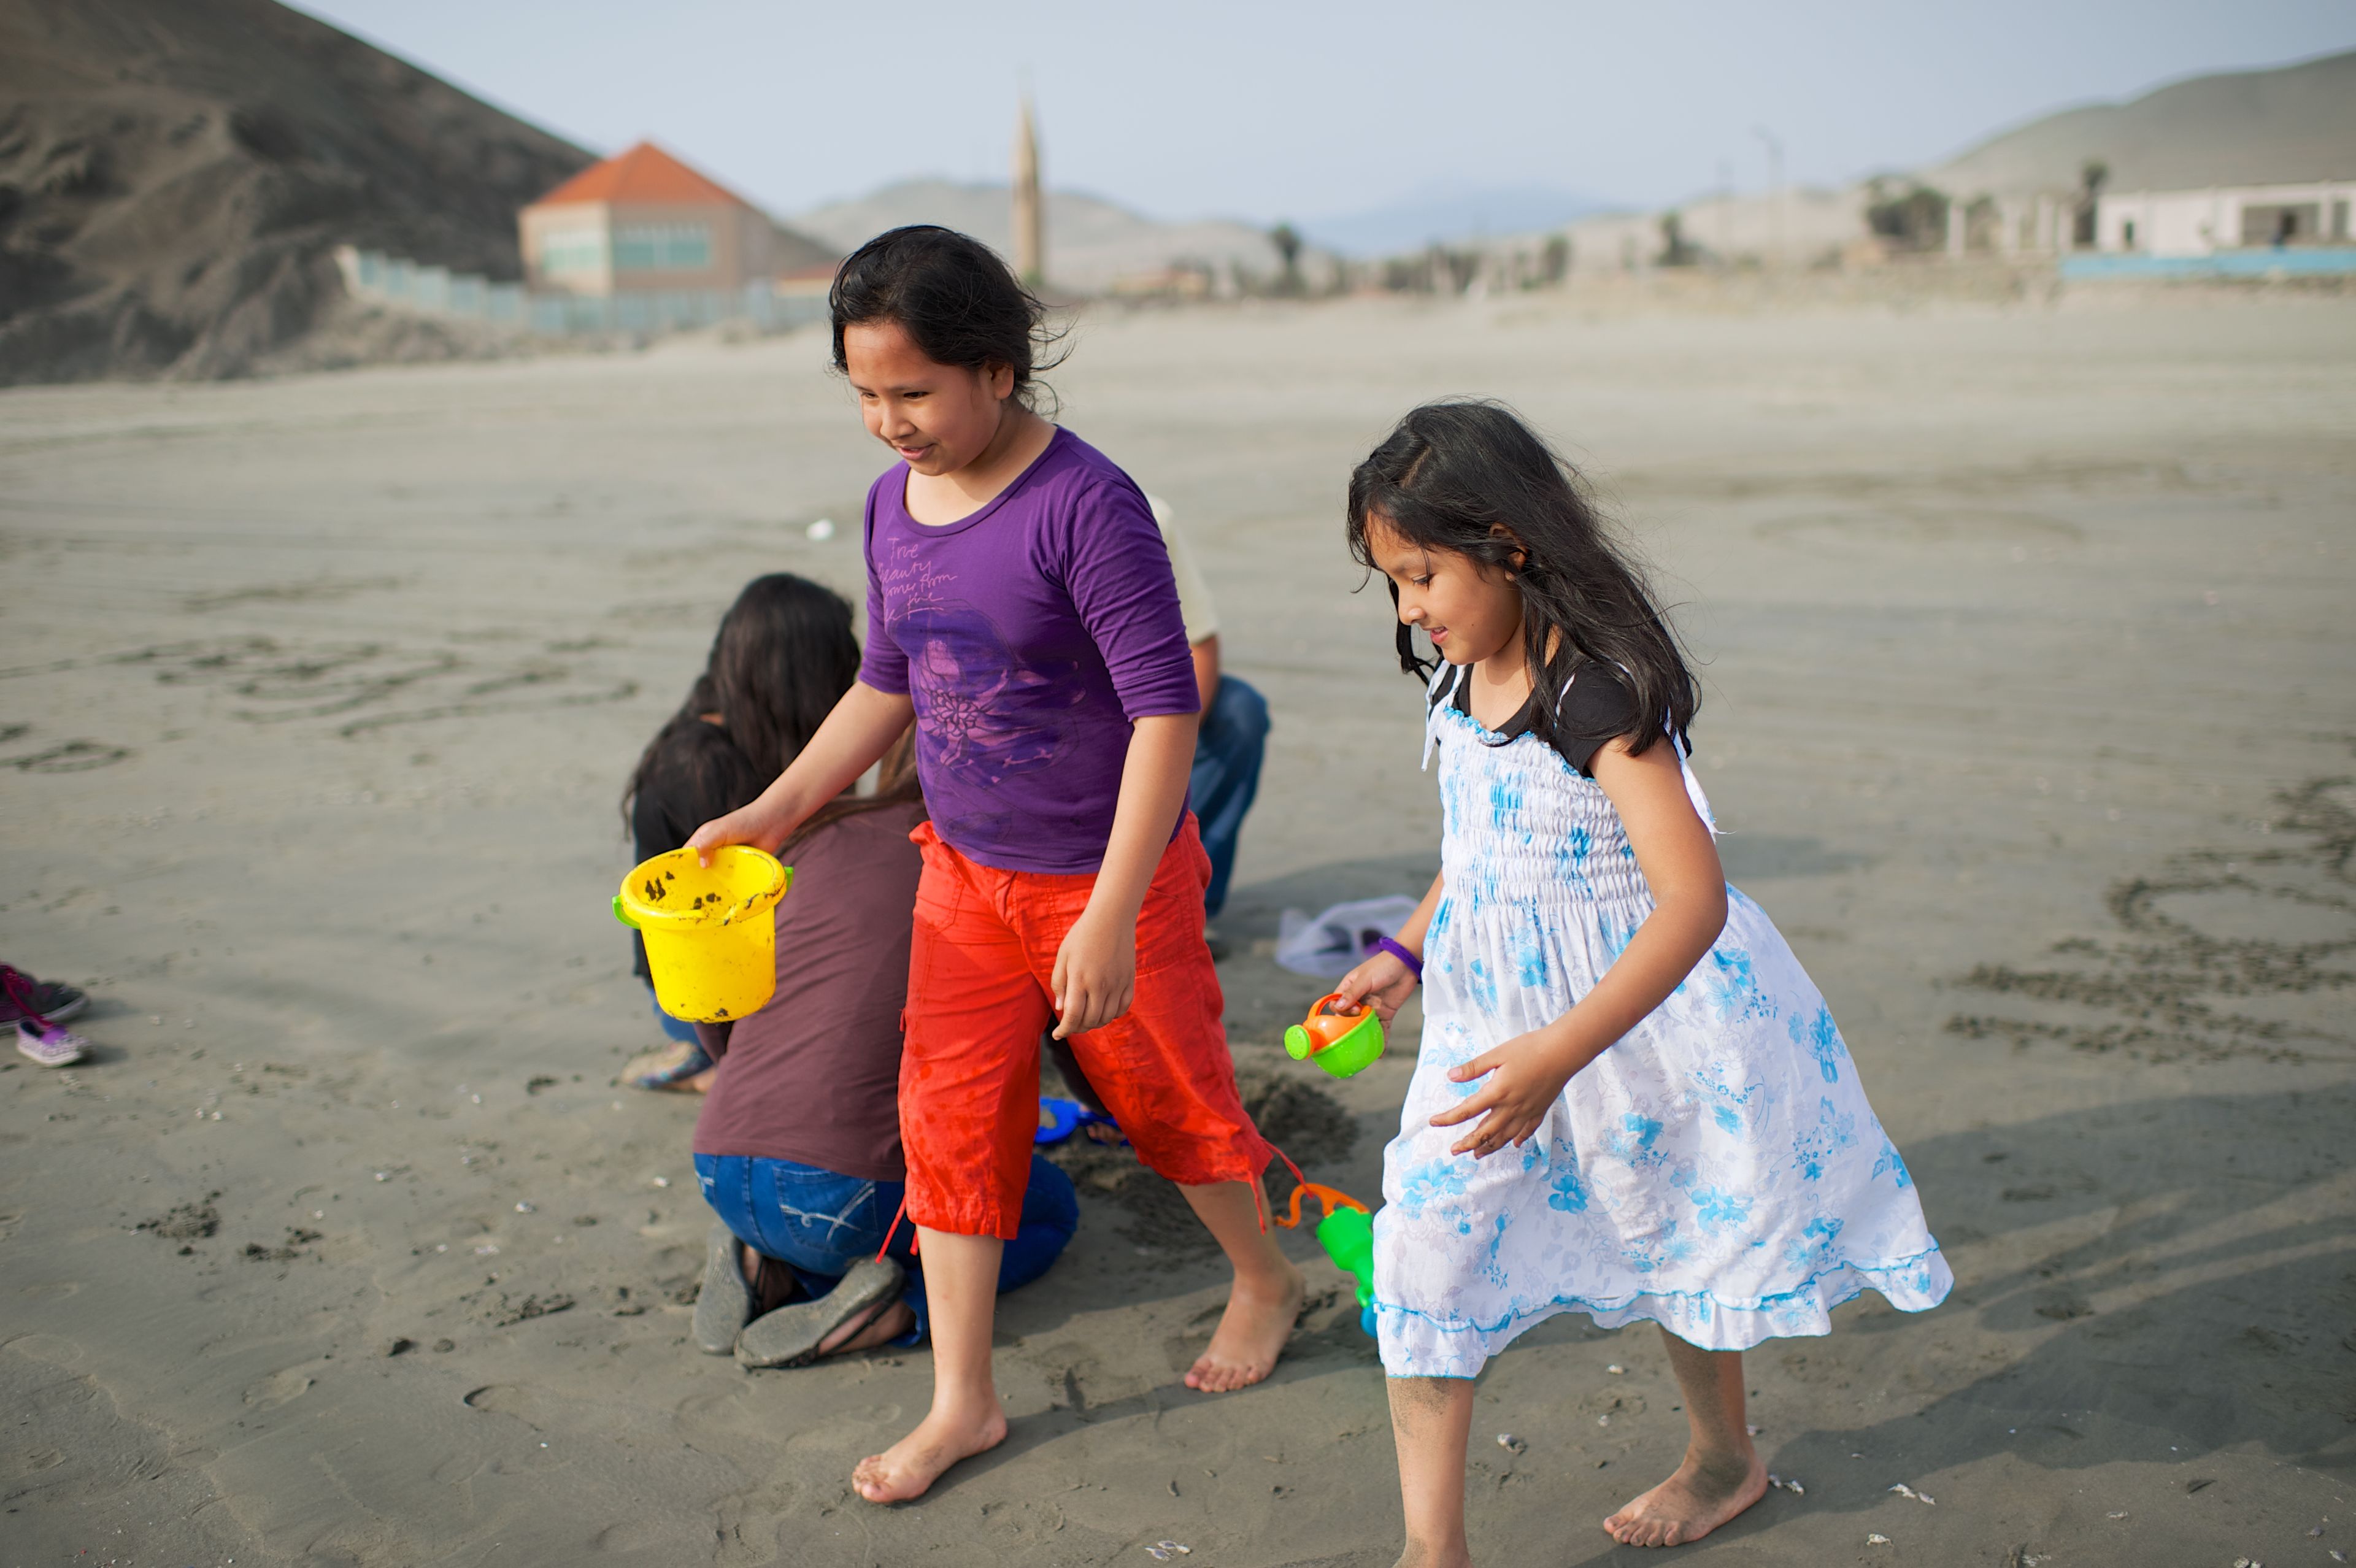 A Peruvian family plays outside in the sand.  